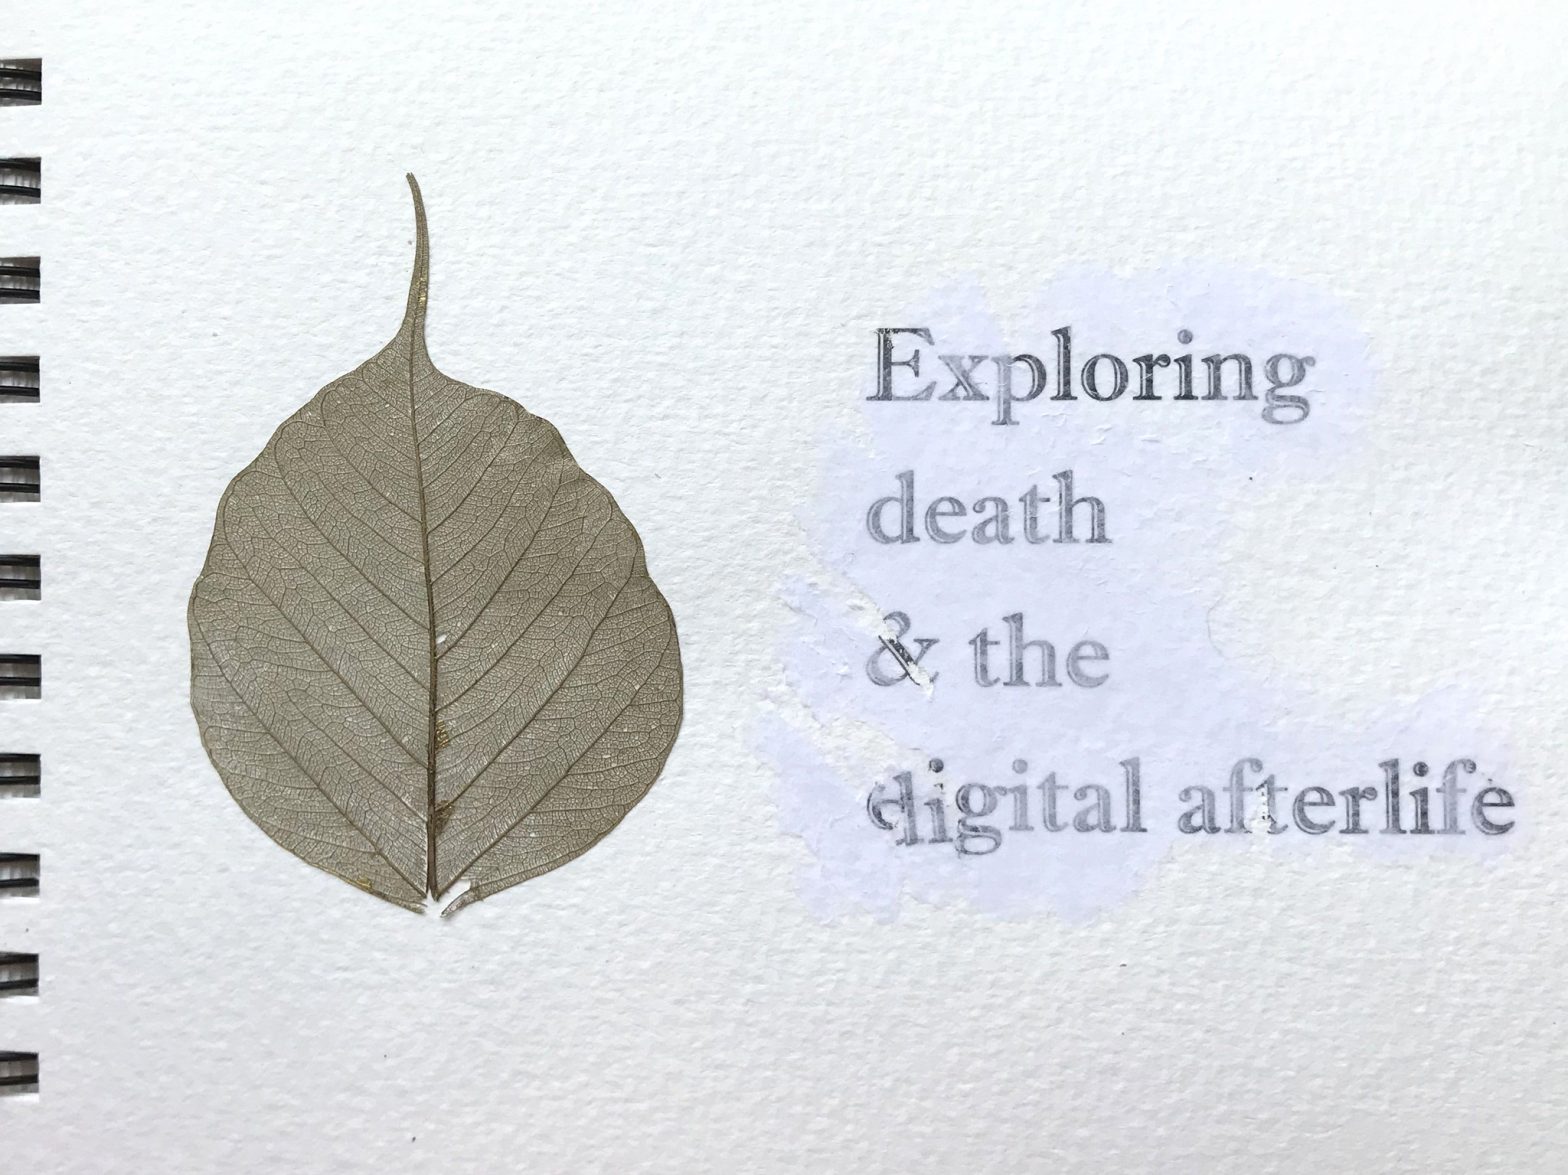 Exploring death and the digital afterlife